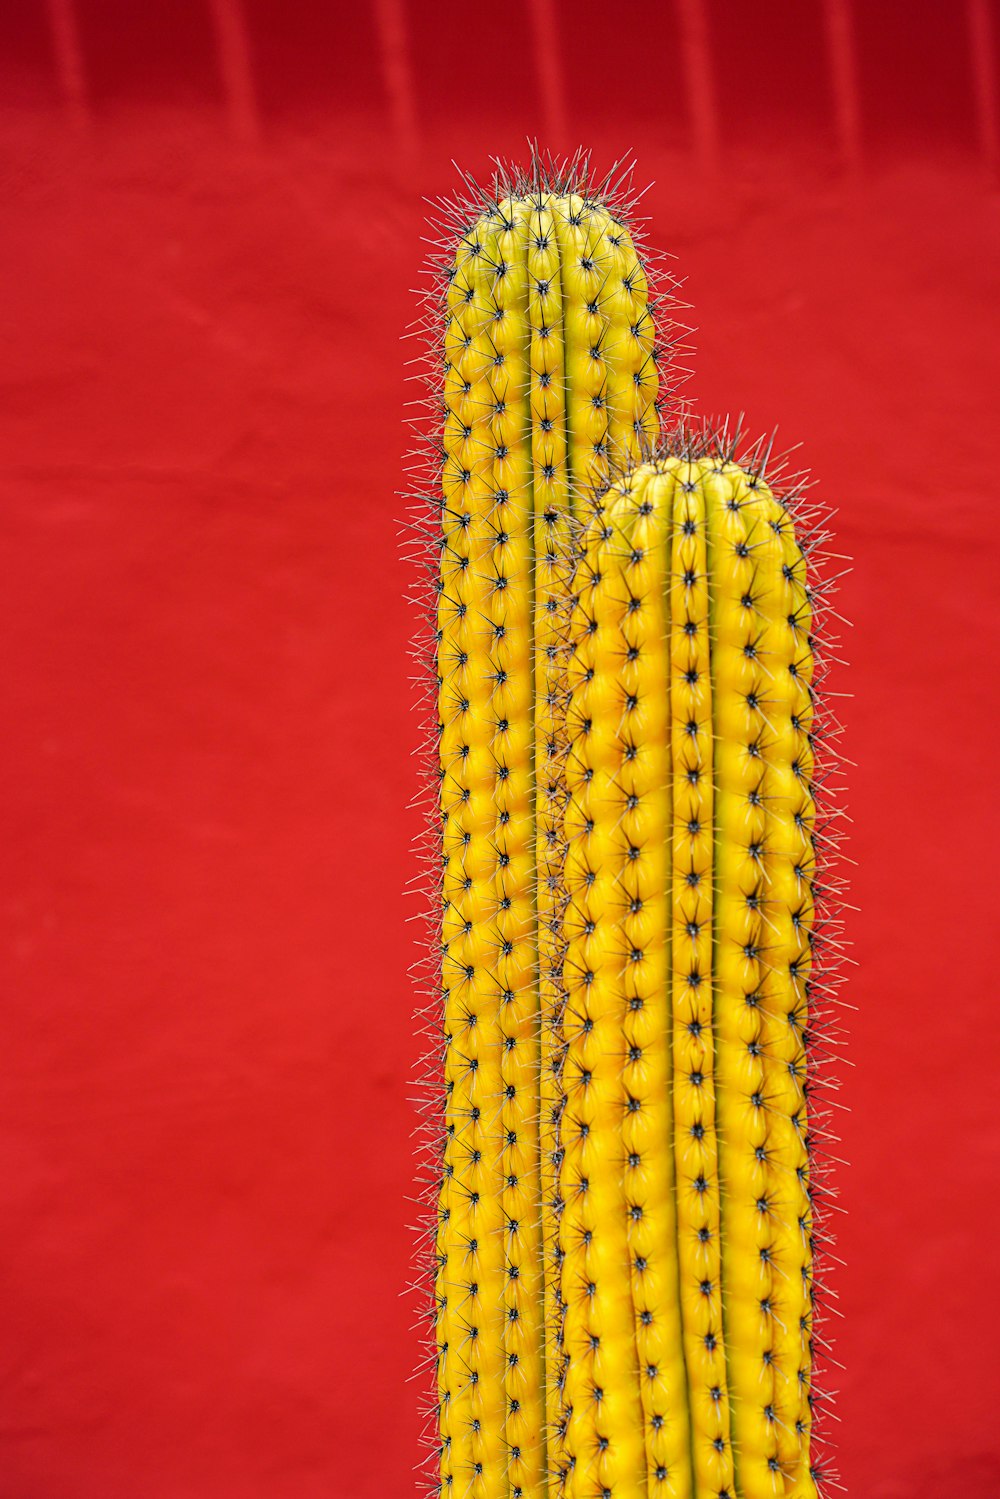 a close up of a cactus plant against a red background